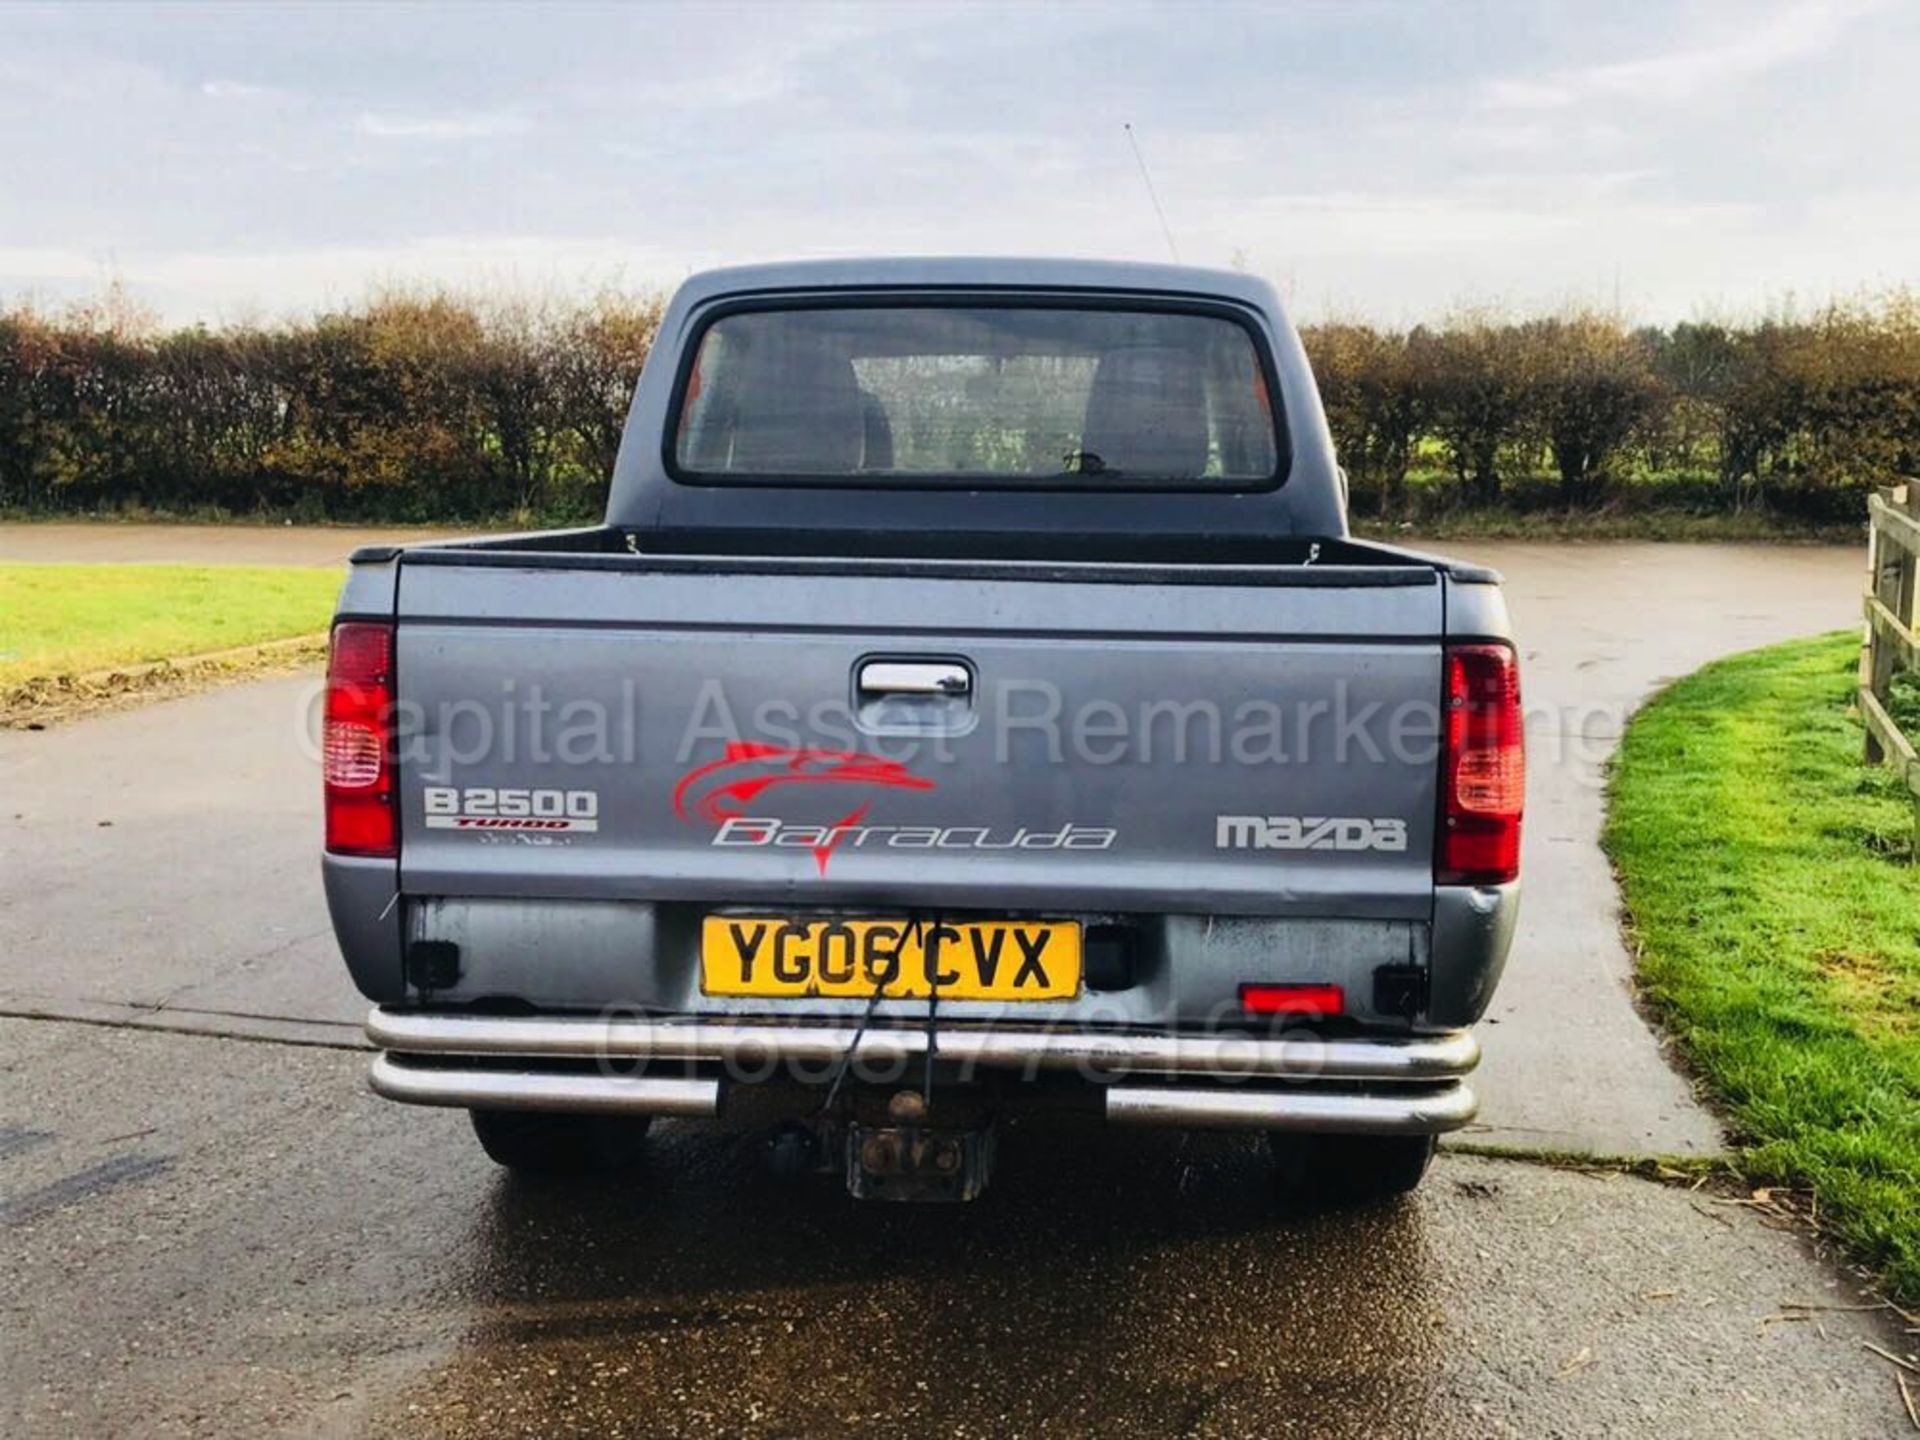 MAZDA B2500 '4-STYLE DOUBLE CAB PICK-UP' (2006 - 06 REG) '2.5 DIESEL - 109 BHP' *AIR CON* (NO VAT) - Image 6 of 18